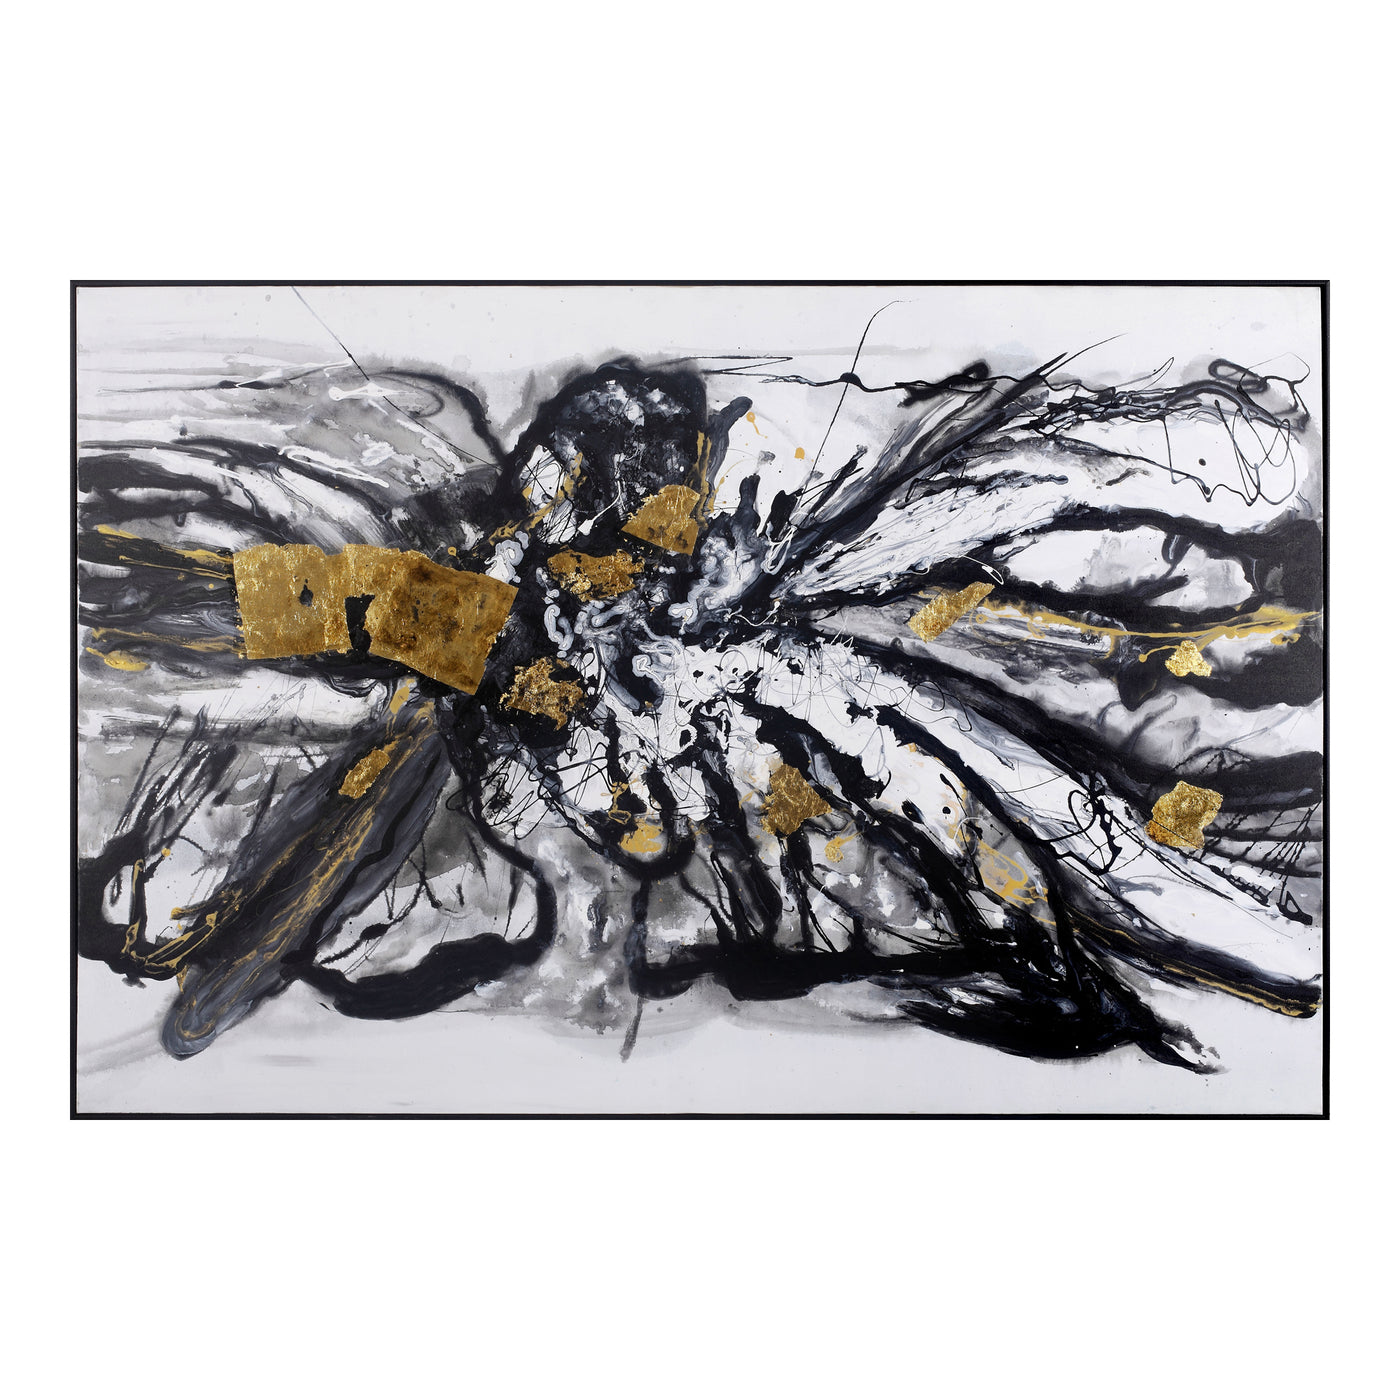 An abstract image of black, white and gold that will compliment your contemporary decor.
<h6>Dimensions</h6>
H= 40
W= 60
D...